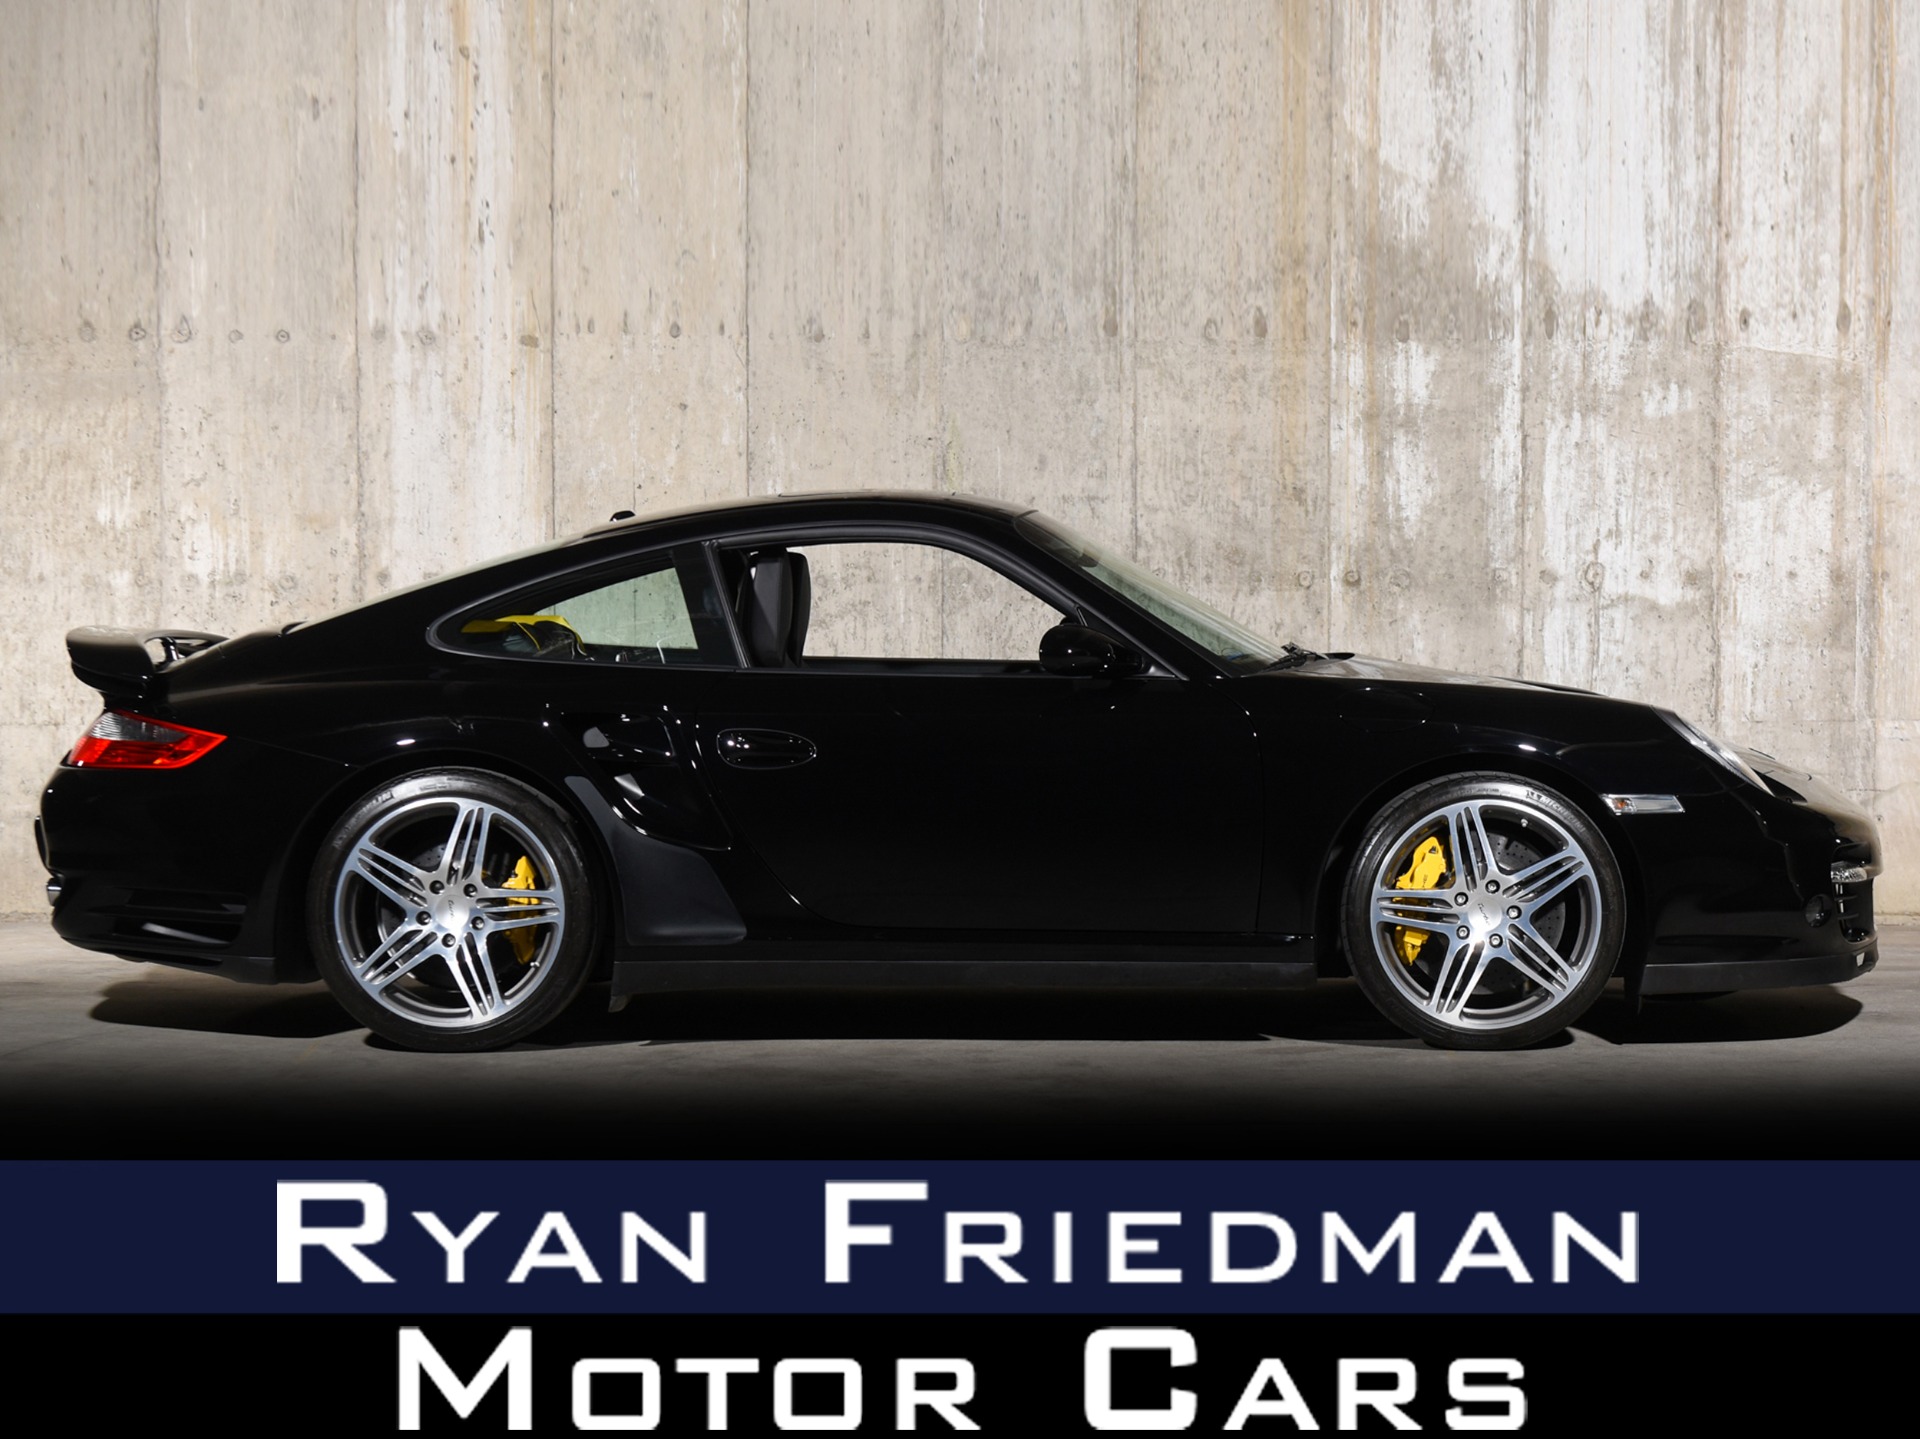 Certified Pre-Owned: 997 Porsche 911